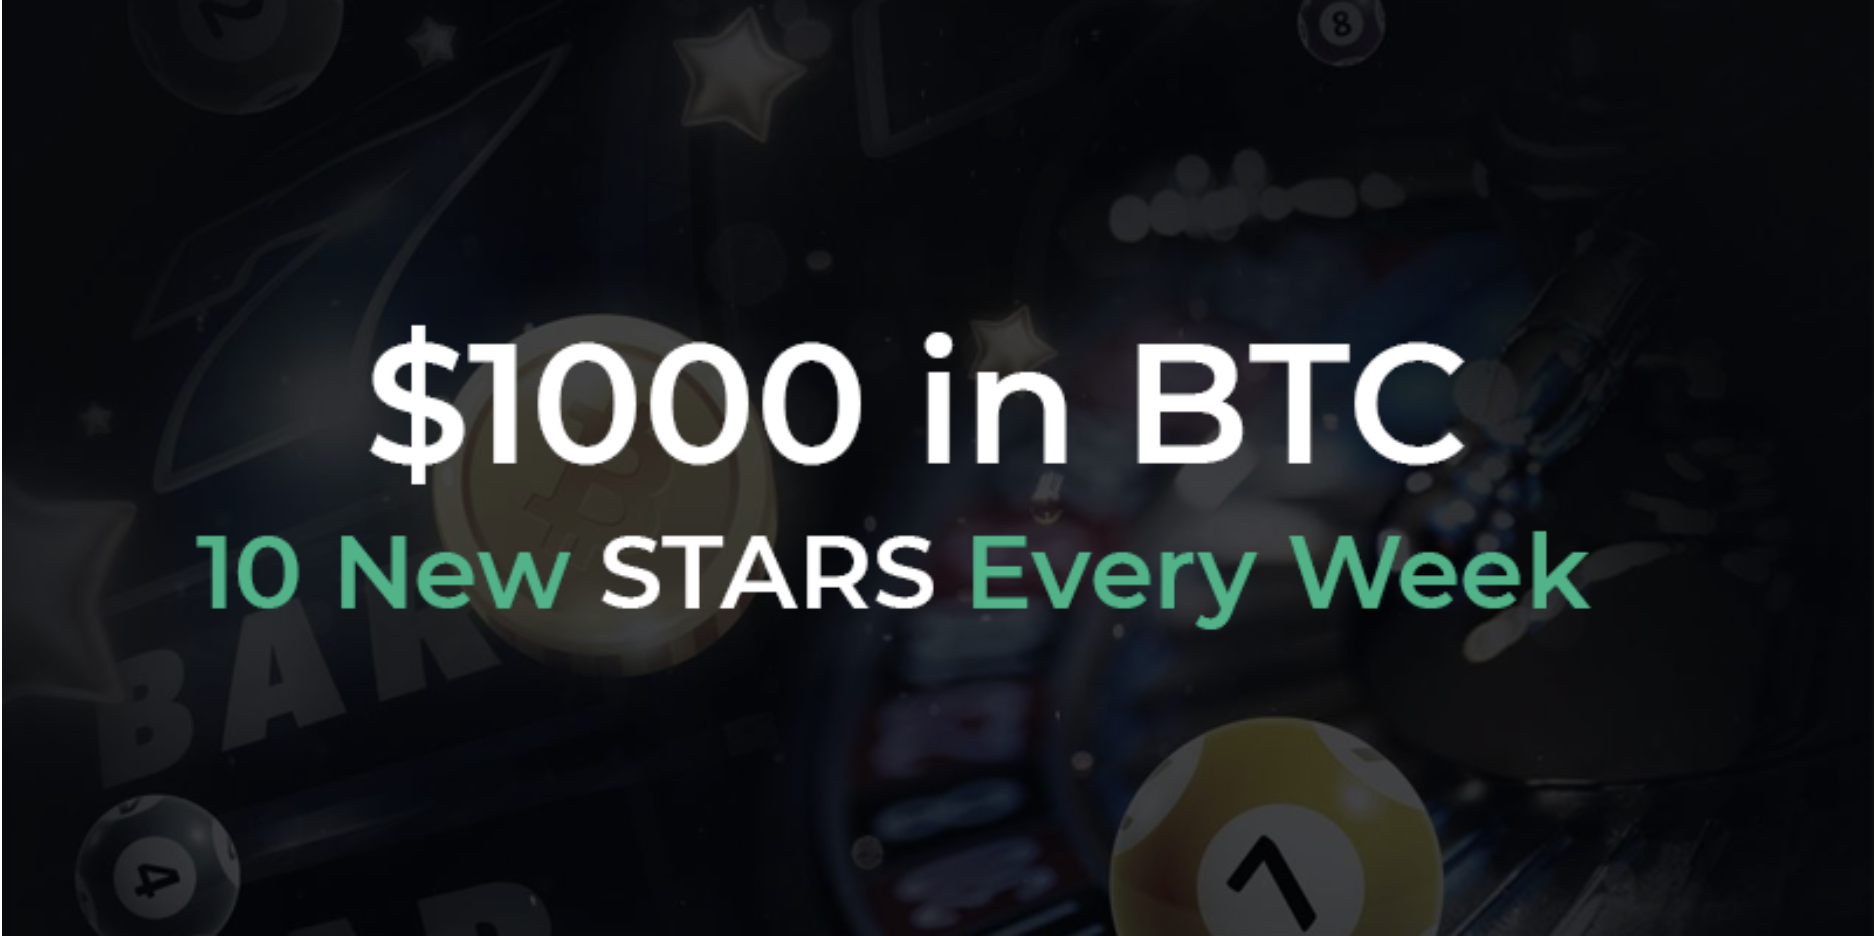 Bitscoins.net Launches Games Stars Leaderboard – Win BTC Every Week